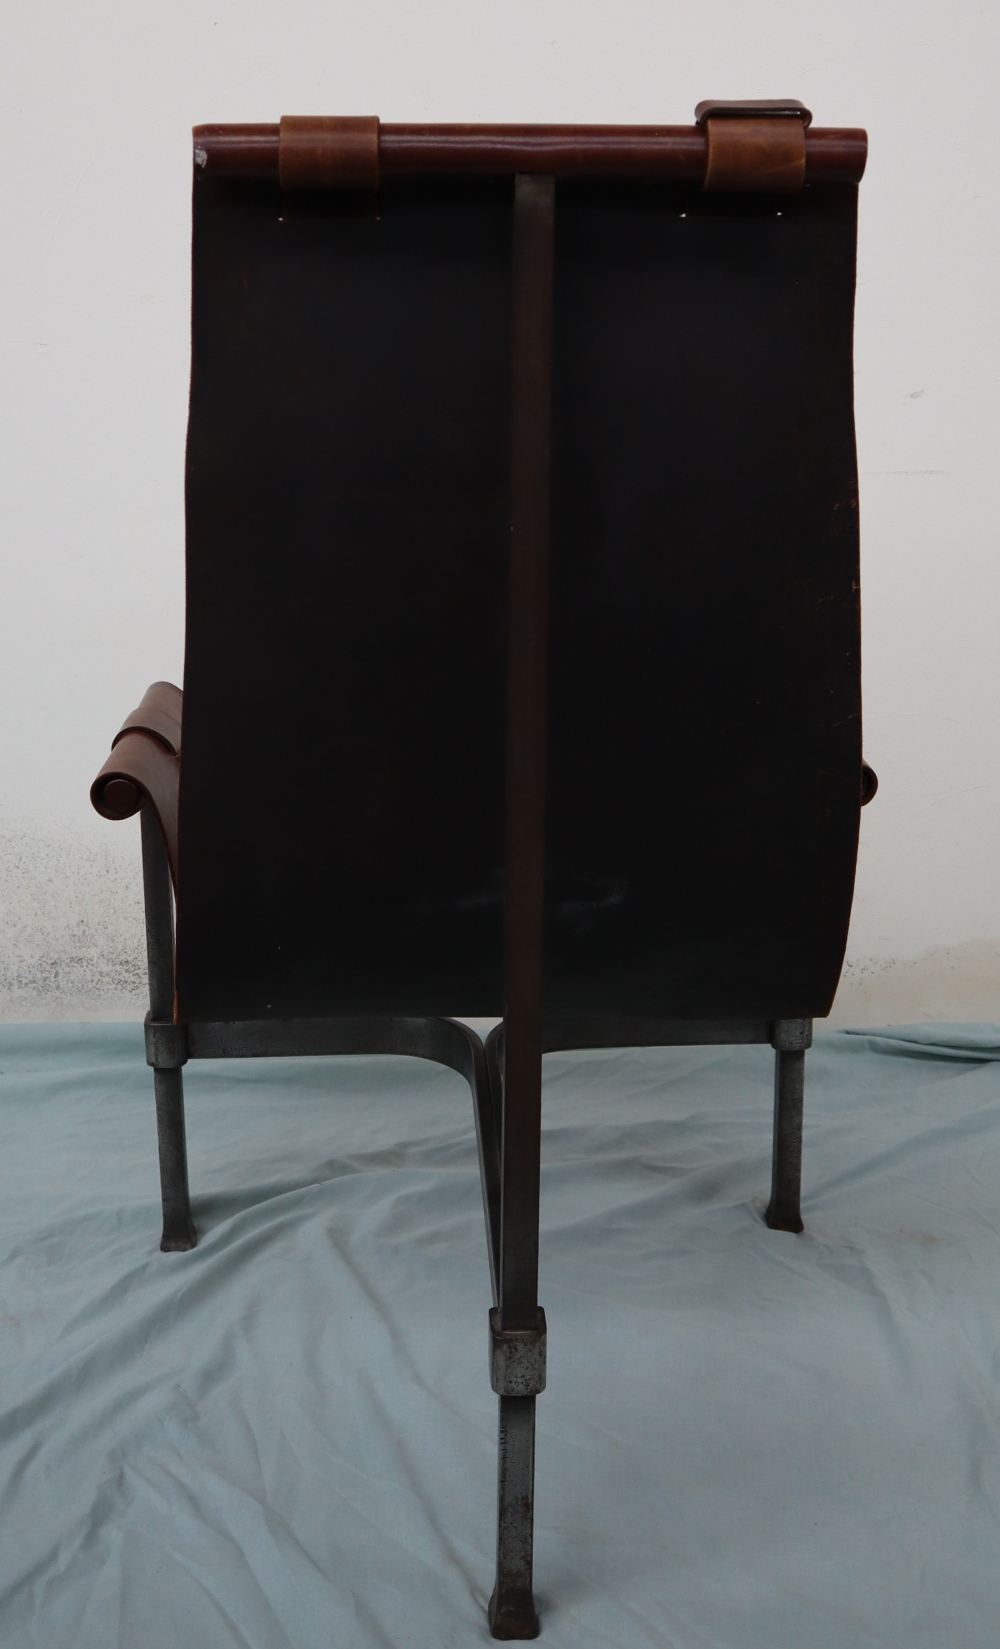 A 20th century leather and wrought iron elbow chair, - Image 5 of 7